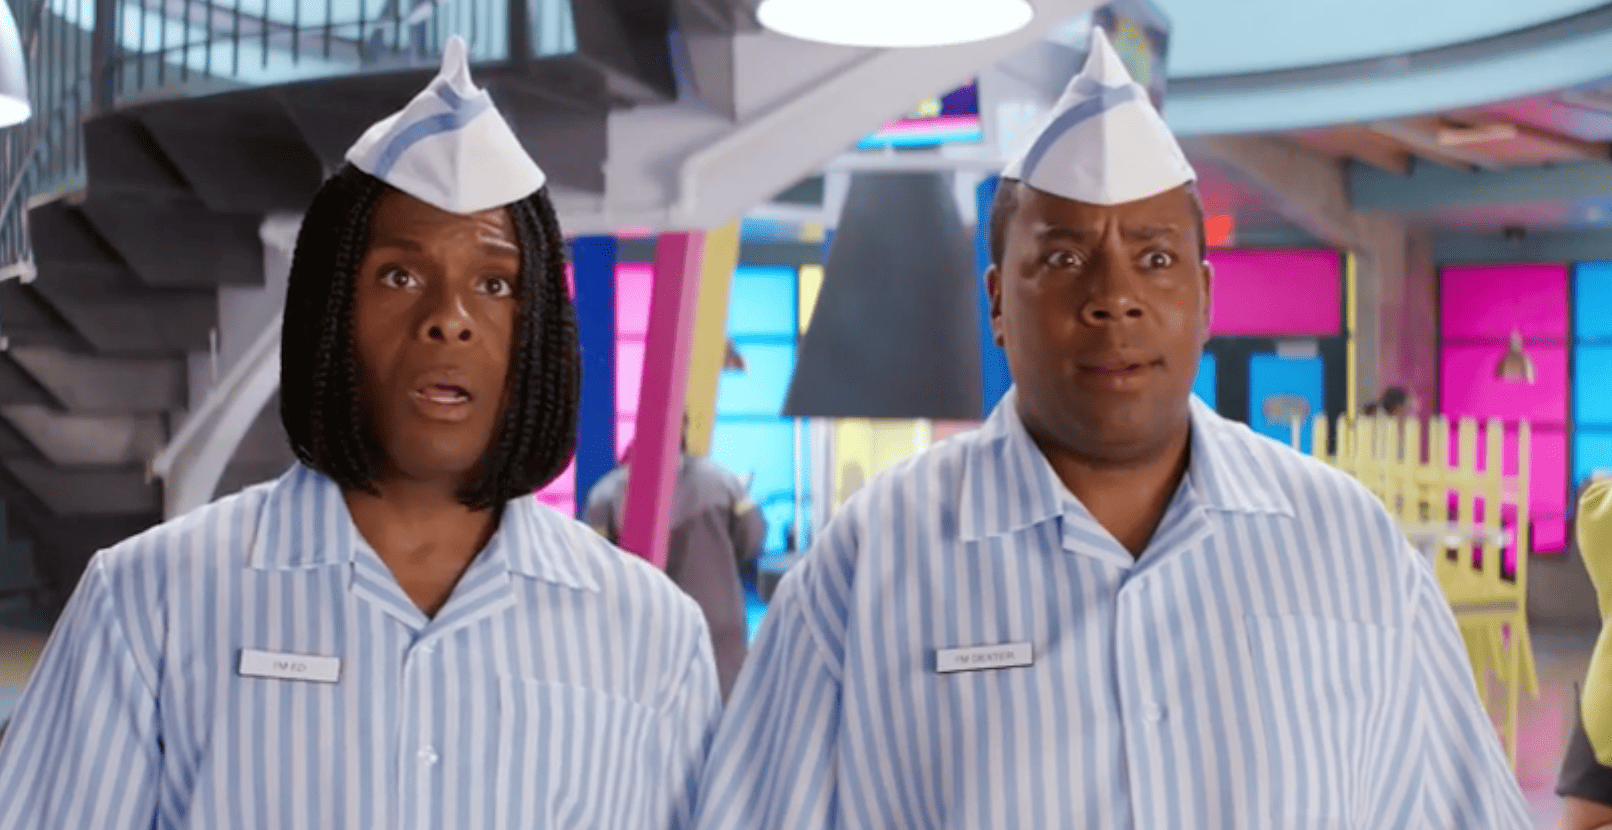 Why ‘Good Burger 2’ Makes Us Miss the Days of ‘Kenan & Kel’ and ‘All That’